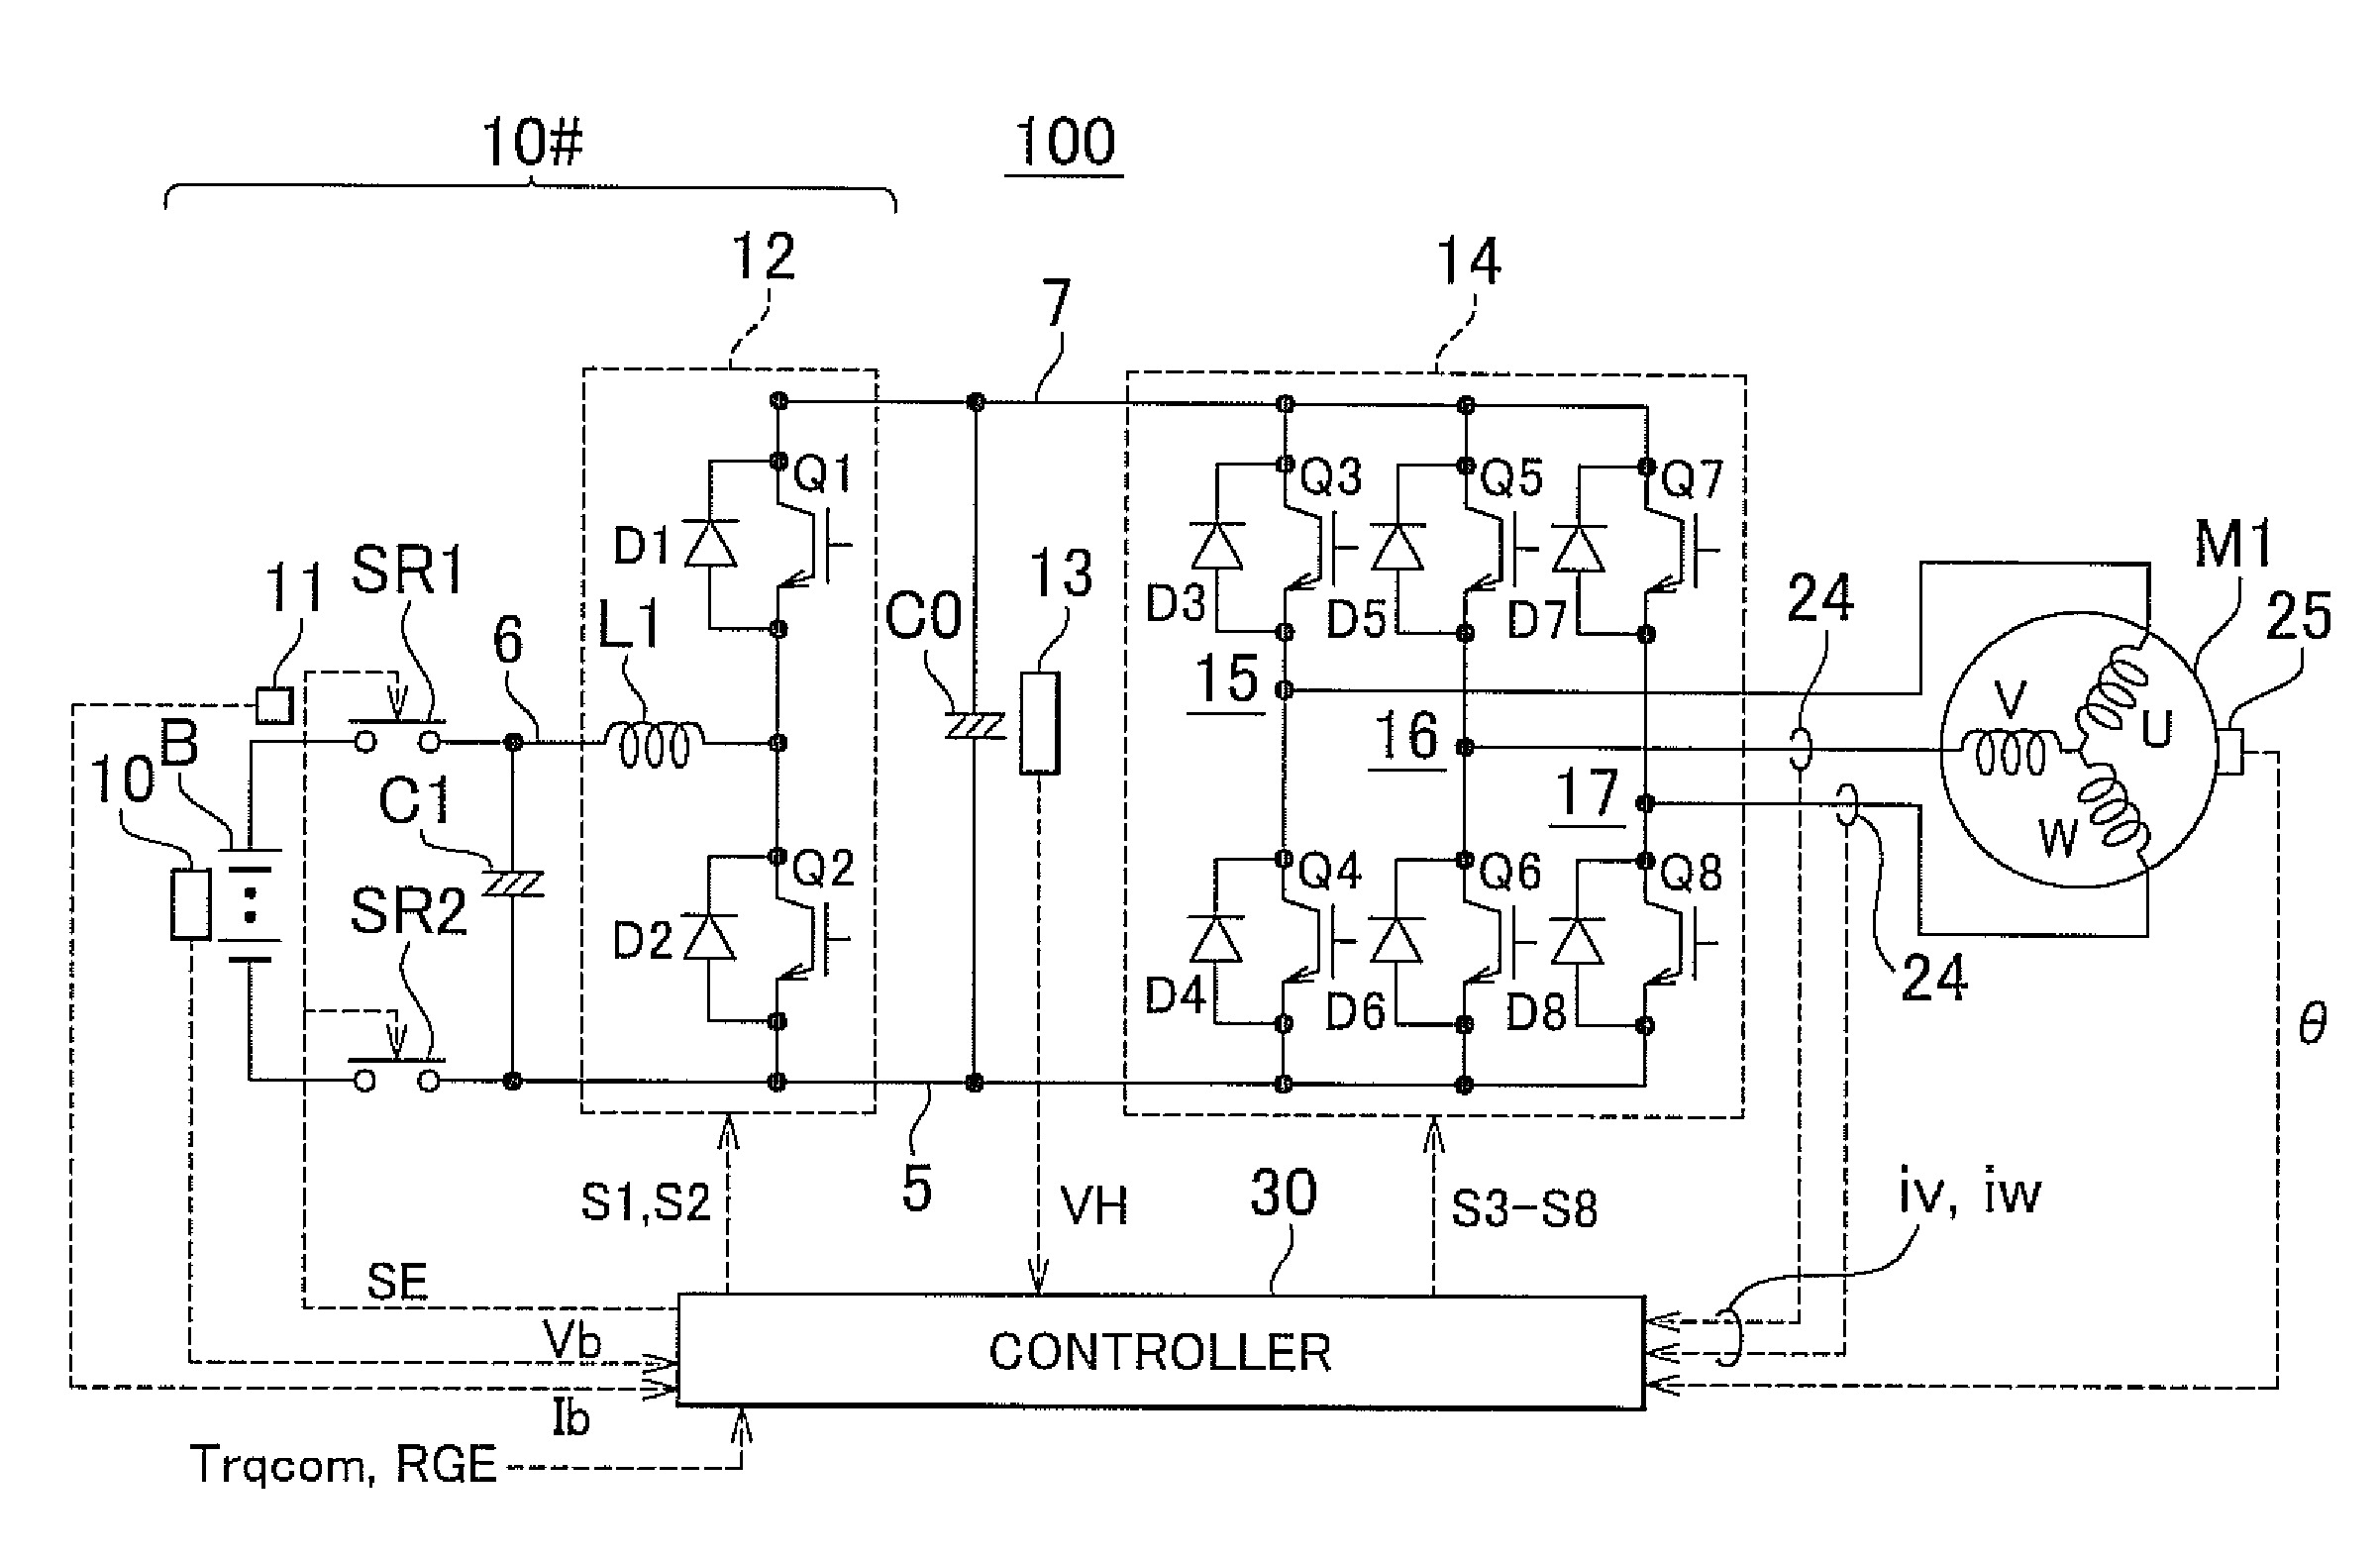 Controller for motor drive control system